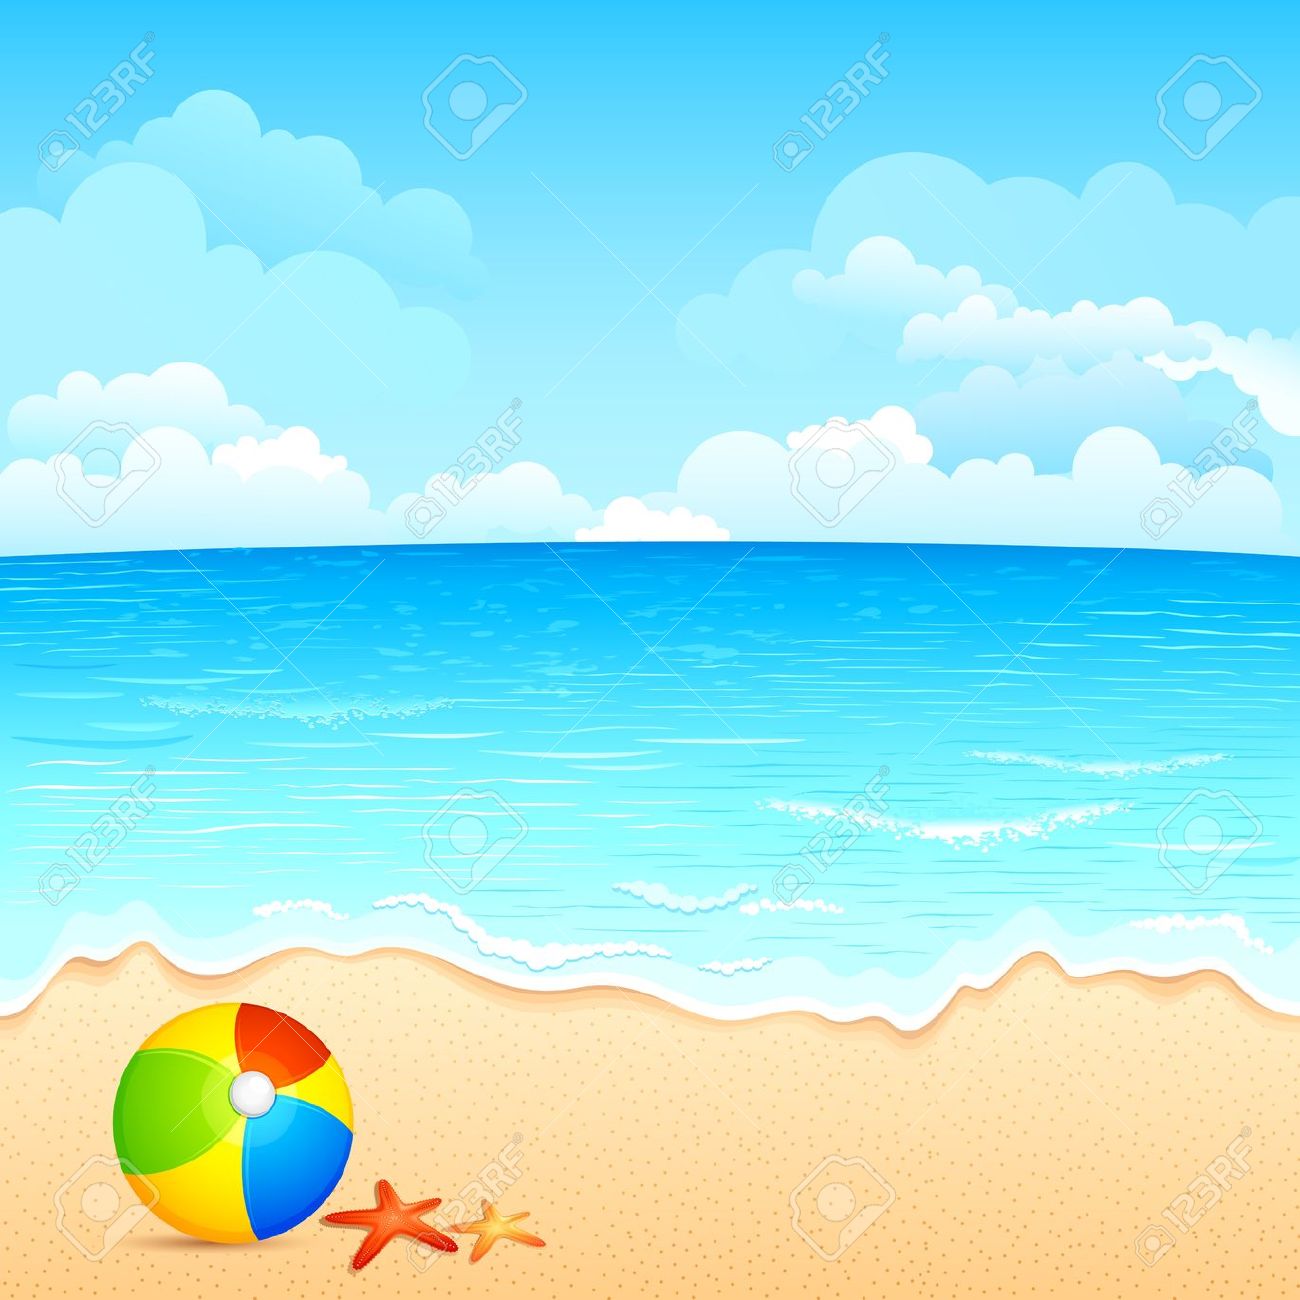 Beach chair clipart free clip art images image 5 ...